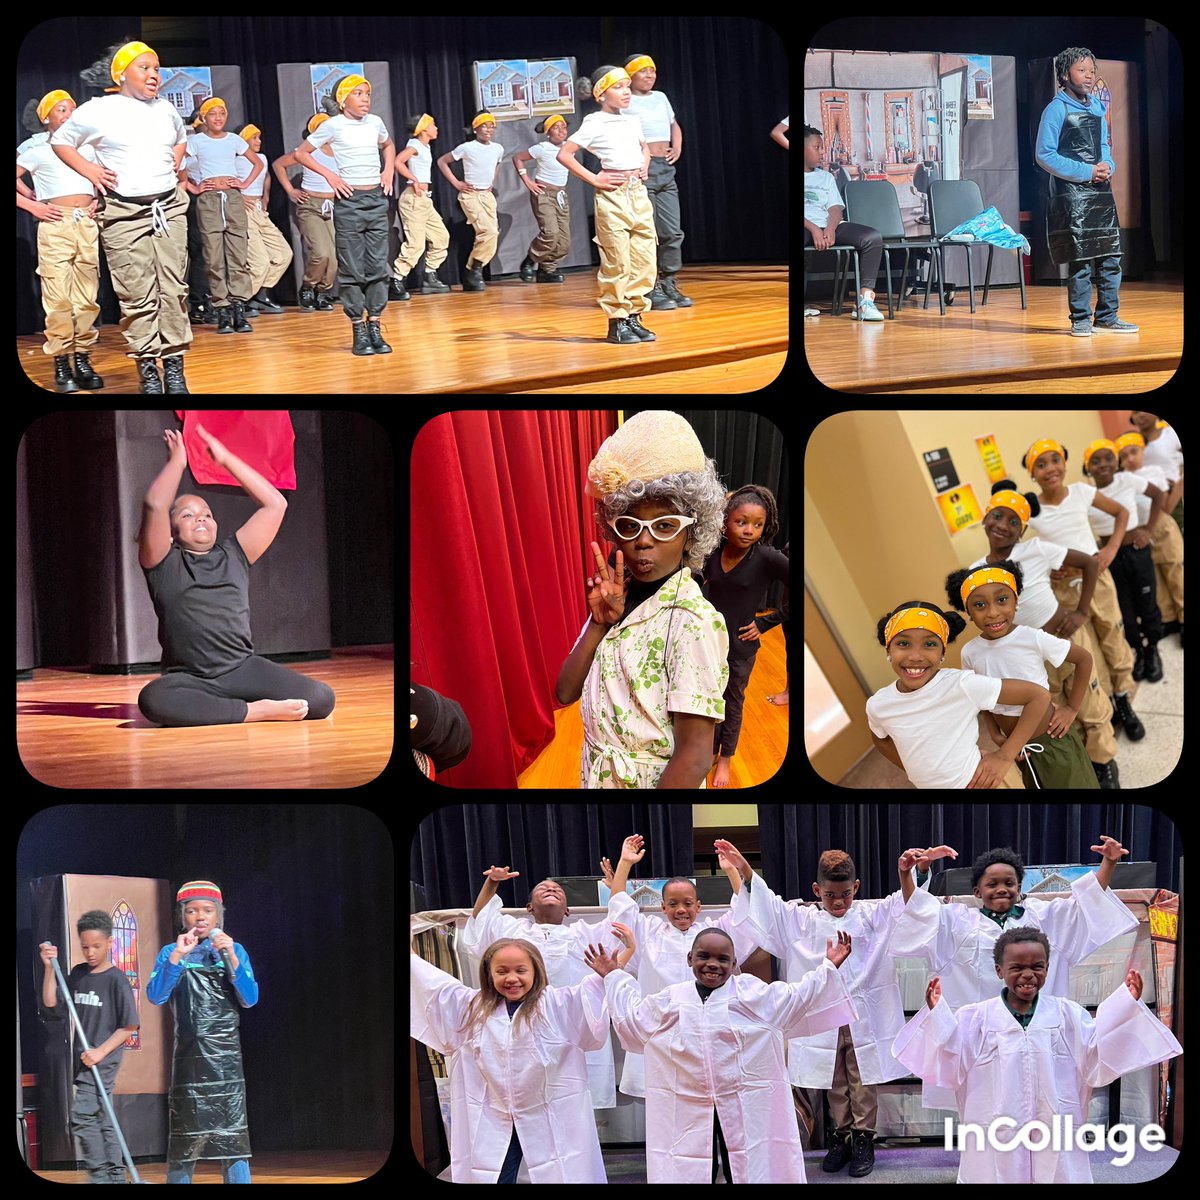 A little snippet of the excellence that was captured during our Black History program @Thompsonhisd . @TheBrameE @SamuelBrazielSr @AlandraBrewing1 @nwhite4002 @ChanteGary